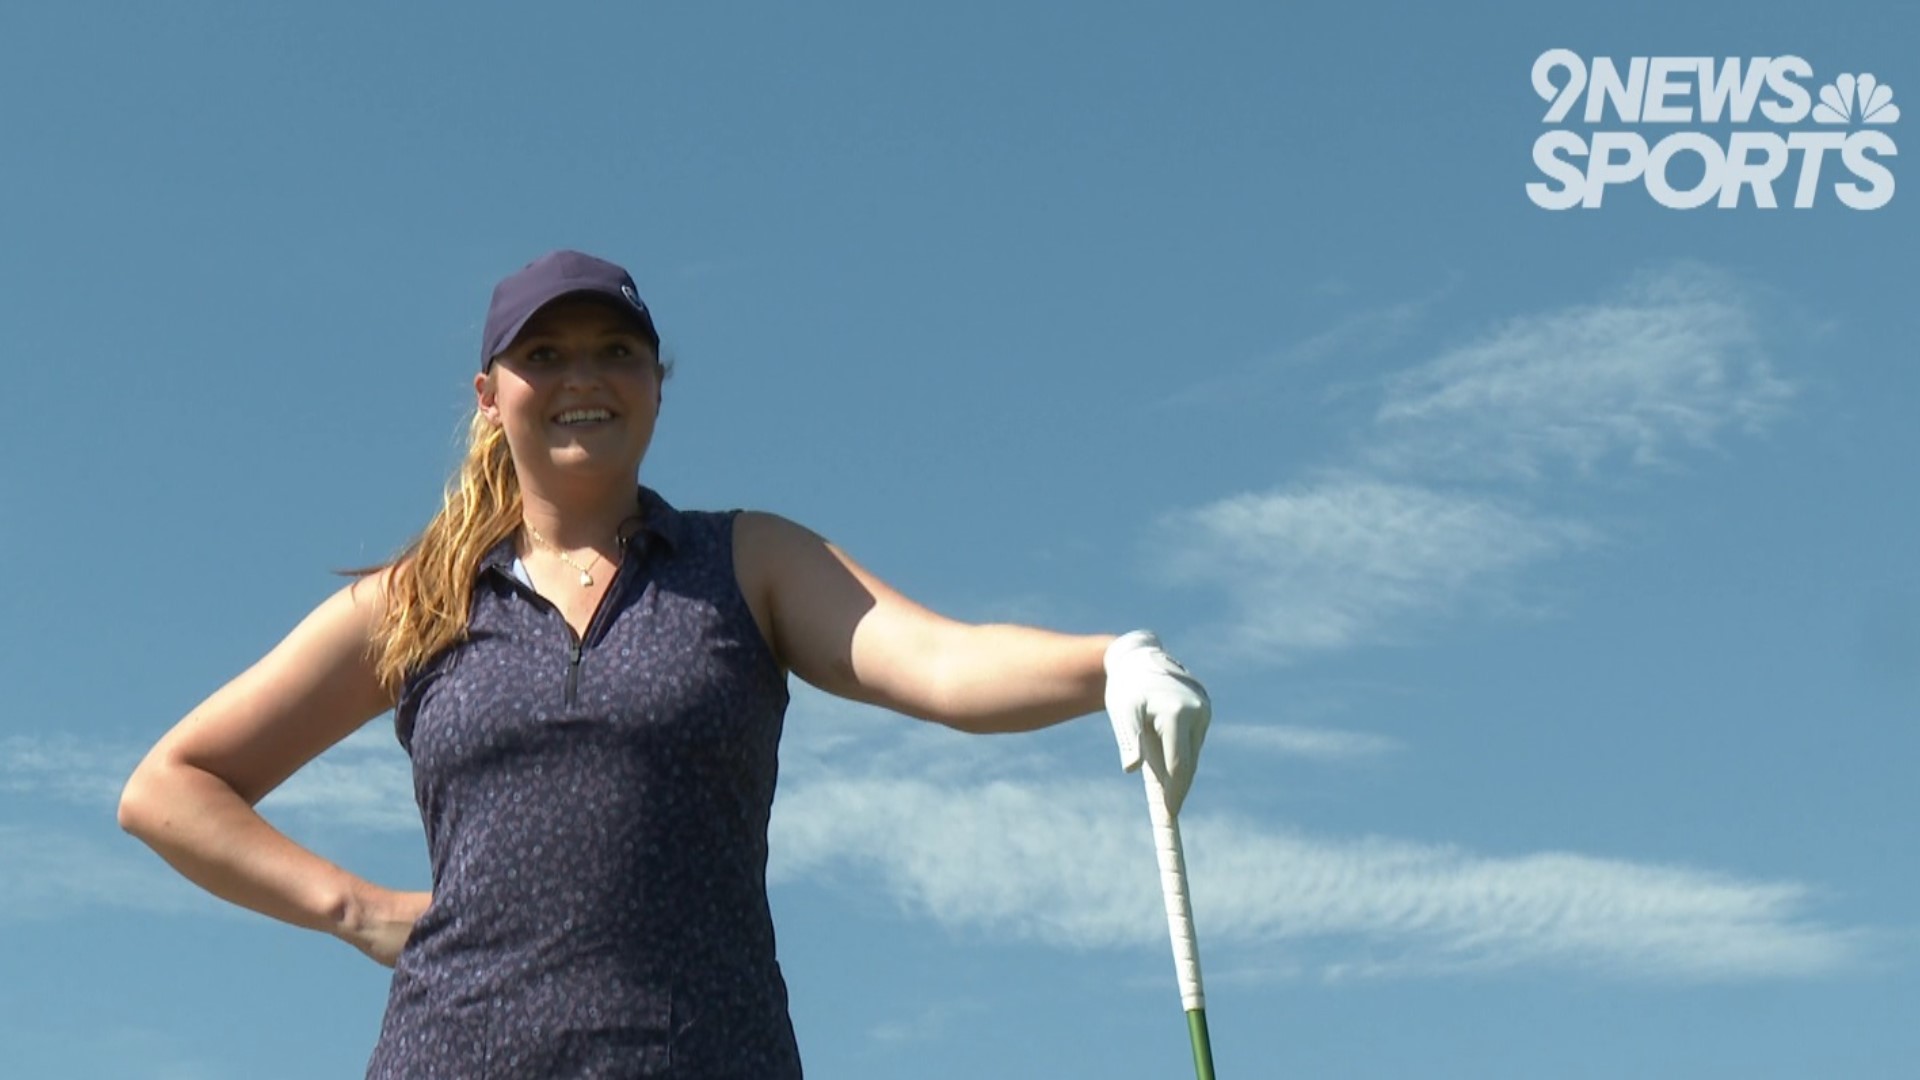 The Colorado resident is currently the number two ranked Long Drive golfer in the world, after battling back from injuries and illnesses.